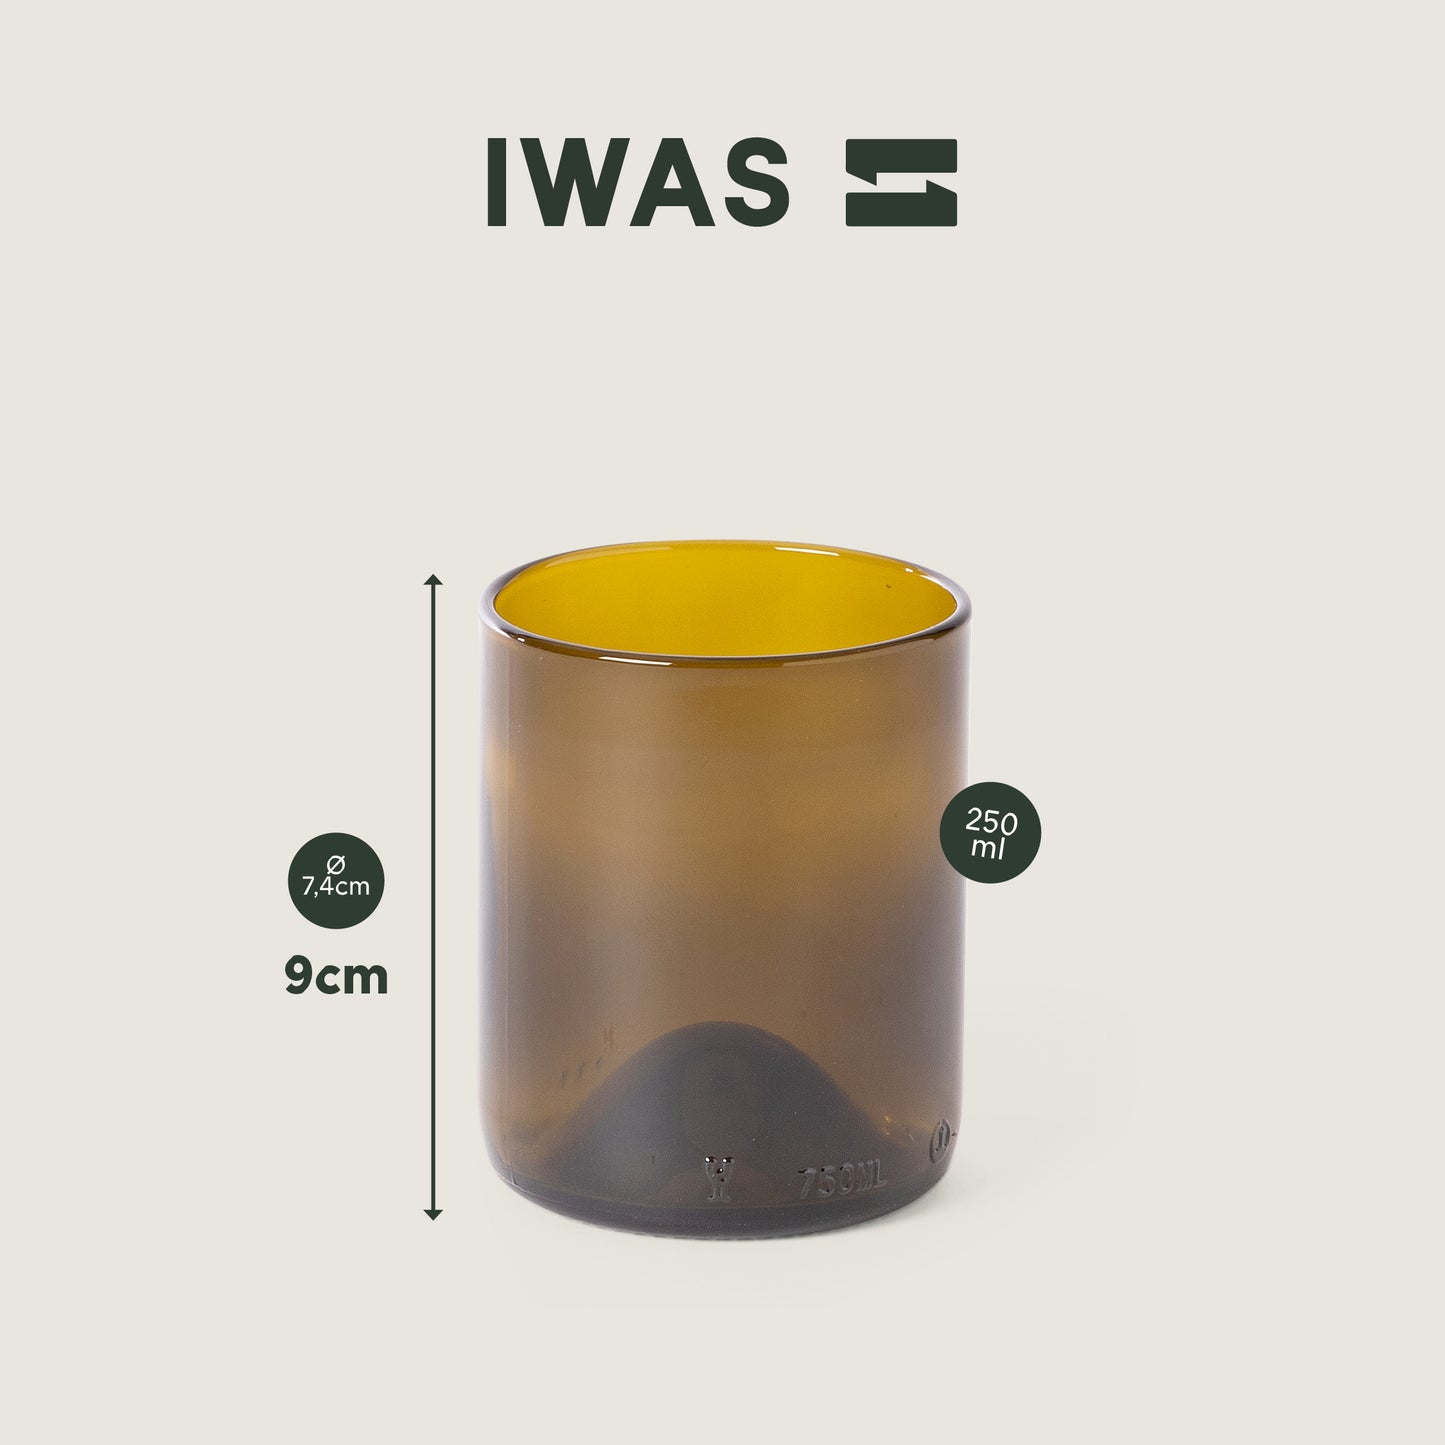 iwas-products-glassware-olive-short-europeanproductdetail